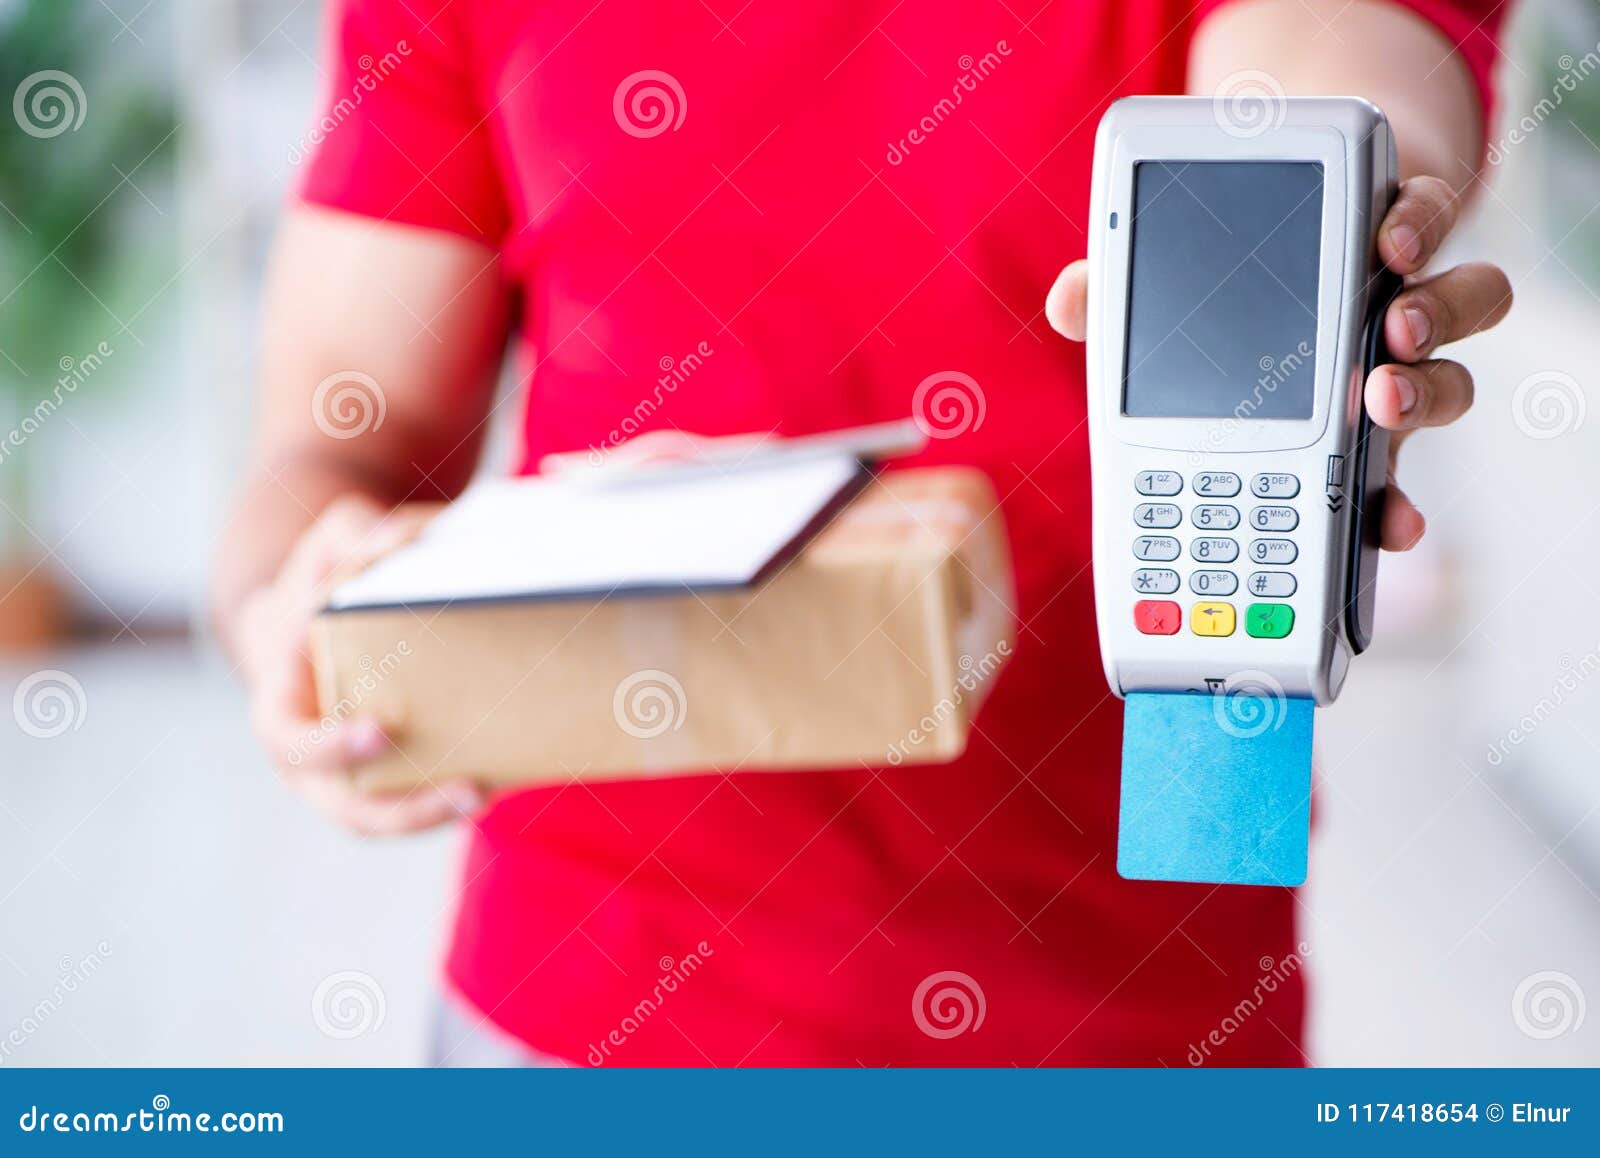 The Parcel Delivery Being Paid With Pos And Credit Card ...